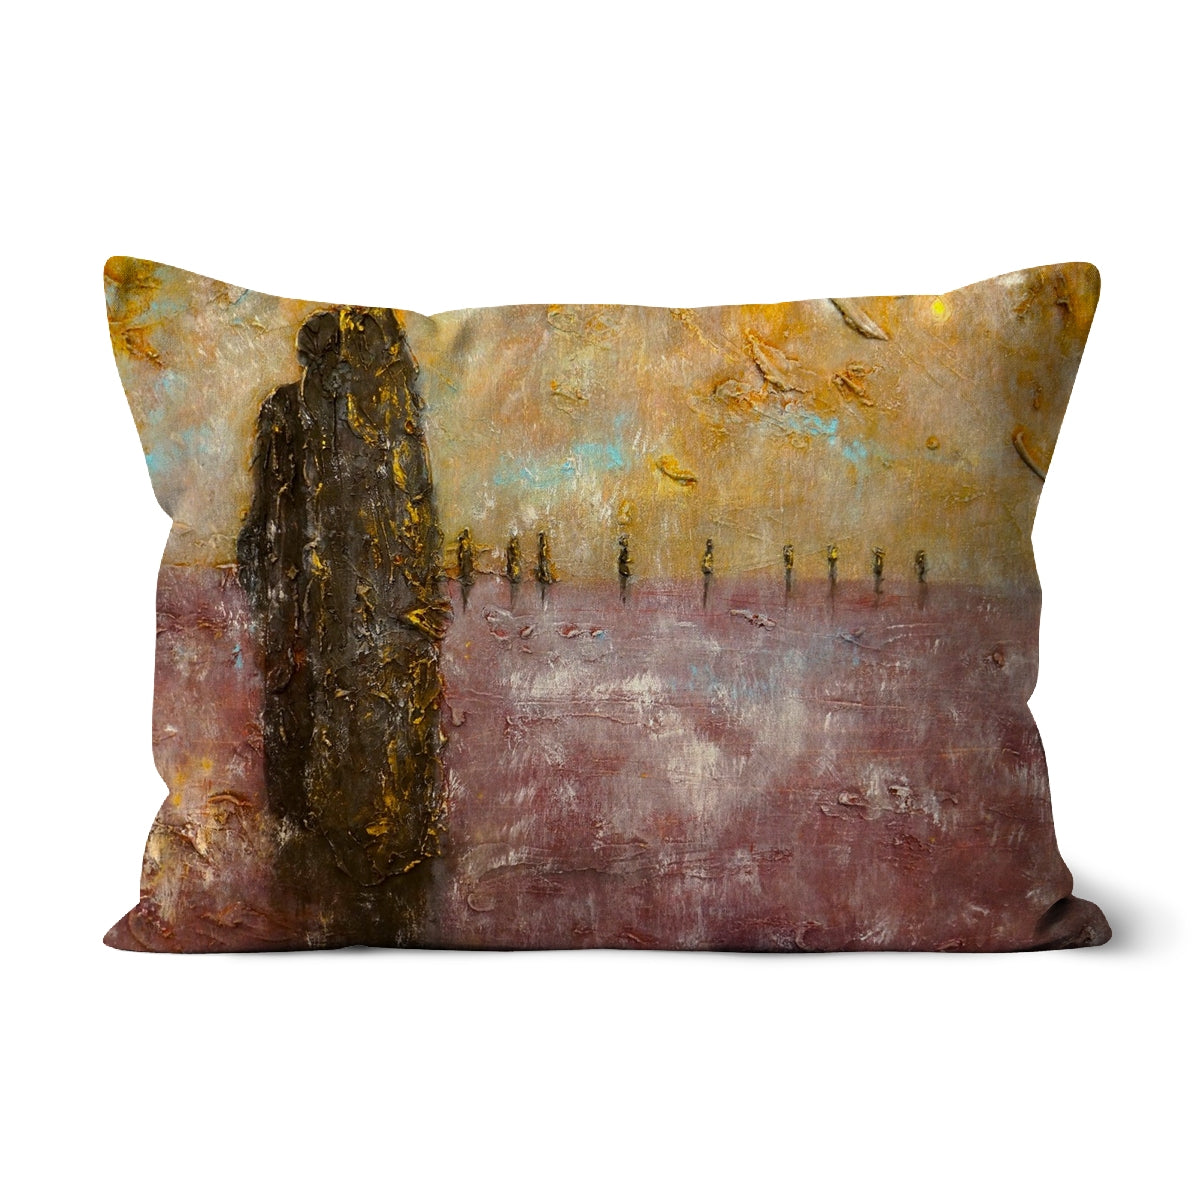 Brodgar Mist Orkney Art Gifts Cushion-Cushions-Orkney Art Gallery-Linen-19"x13"-Paintings, Prints, Homeware, Art Gifts From Scotland By Scottish Artist Kevin Hunter